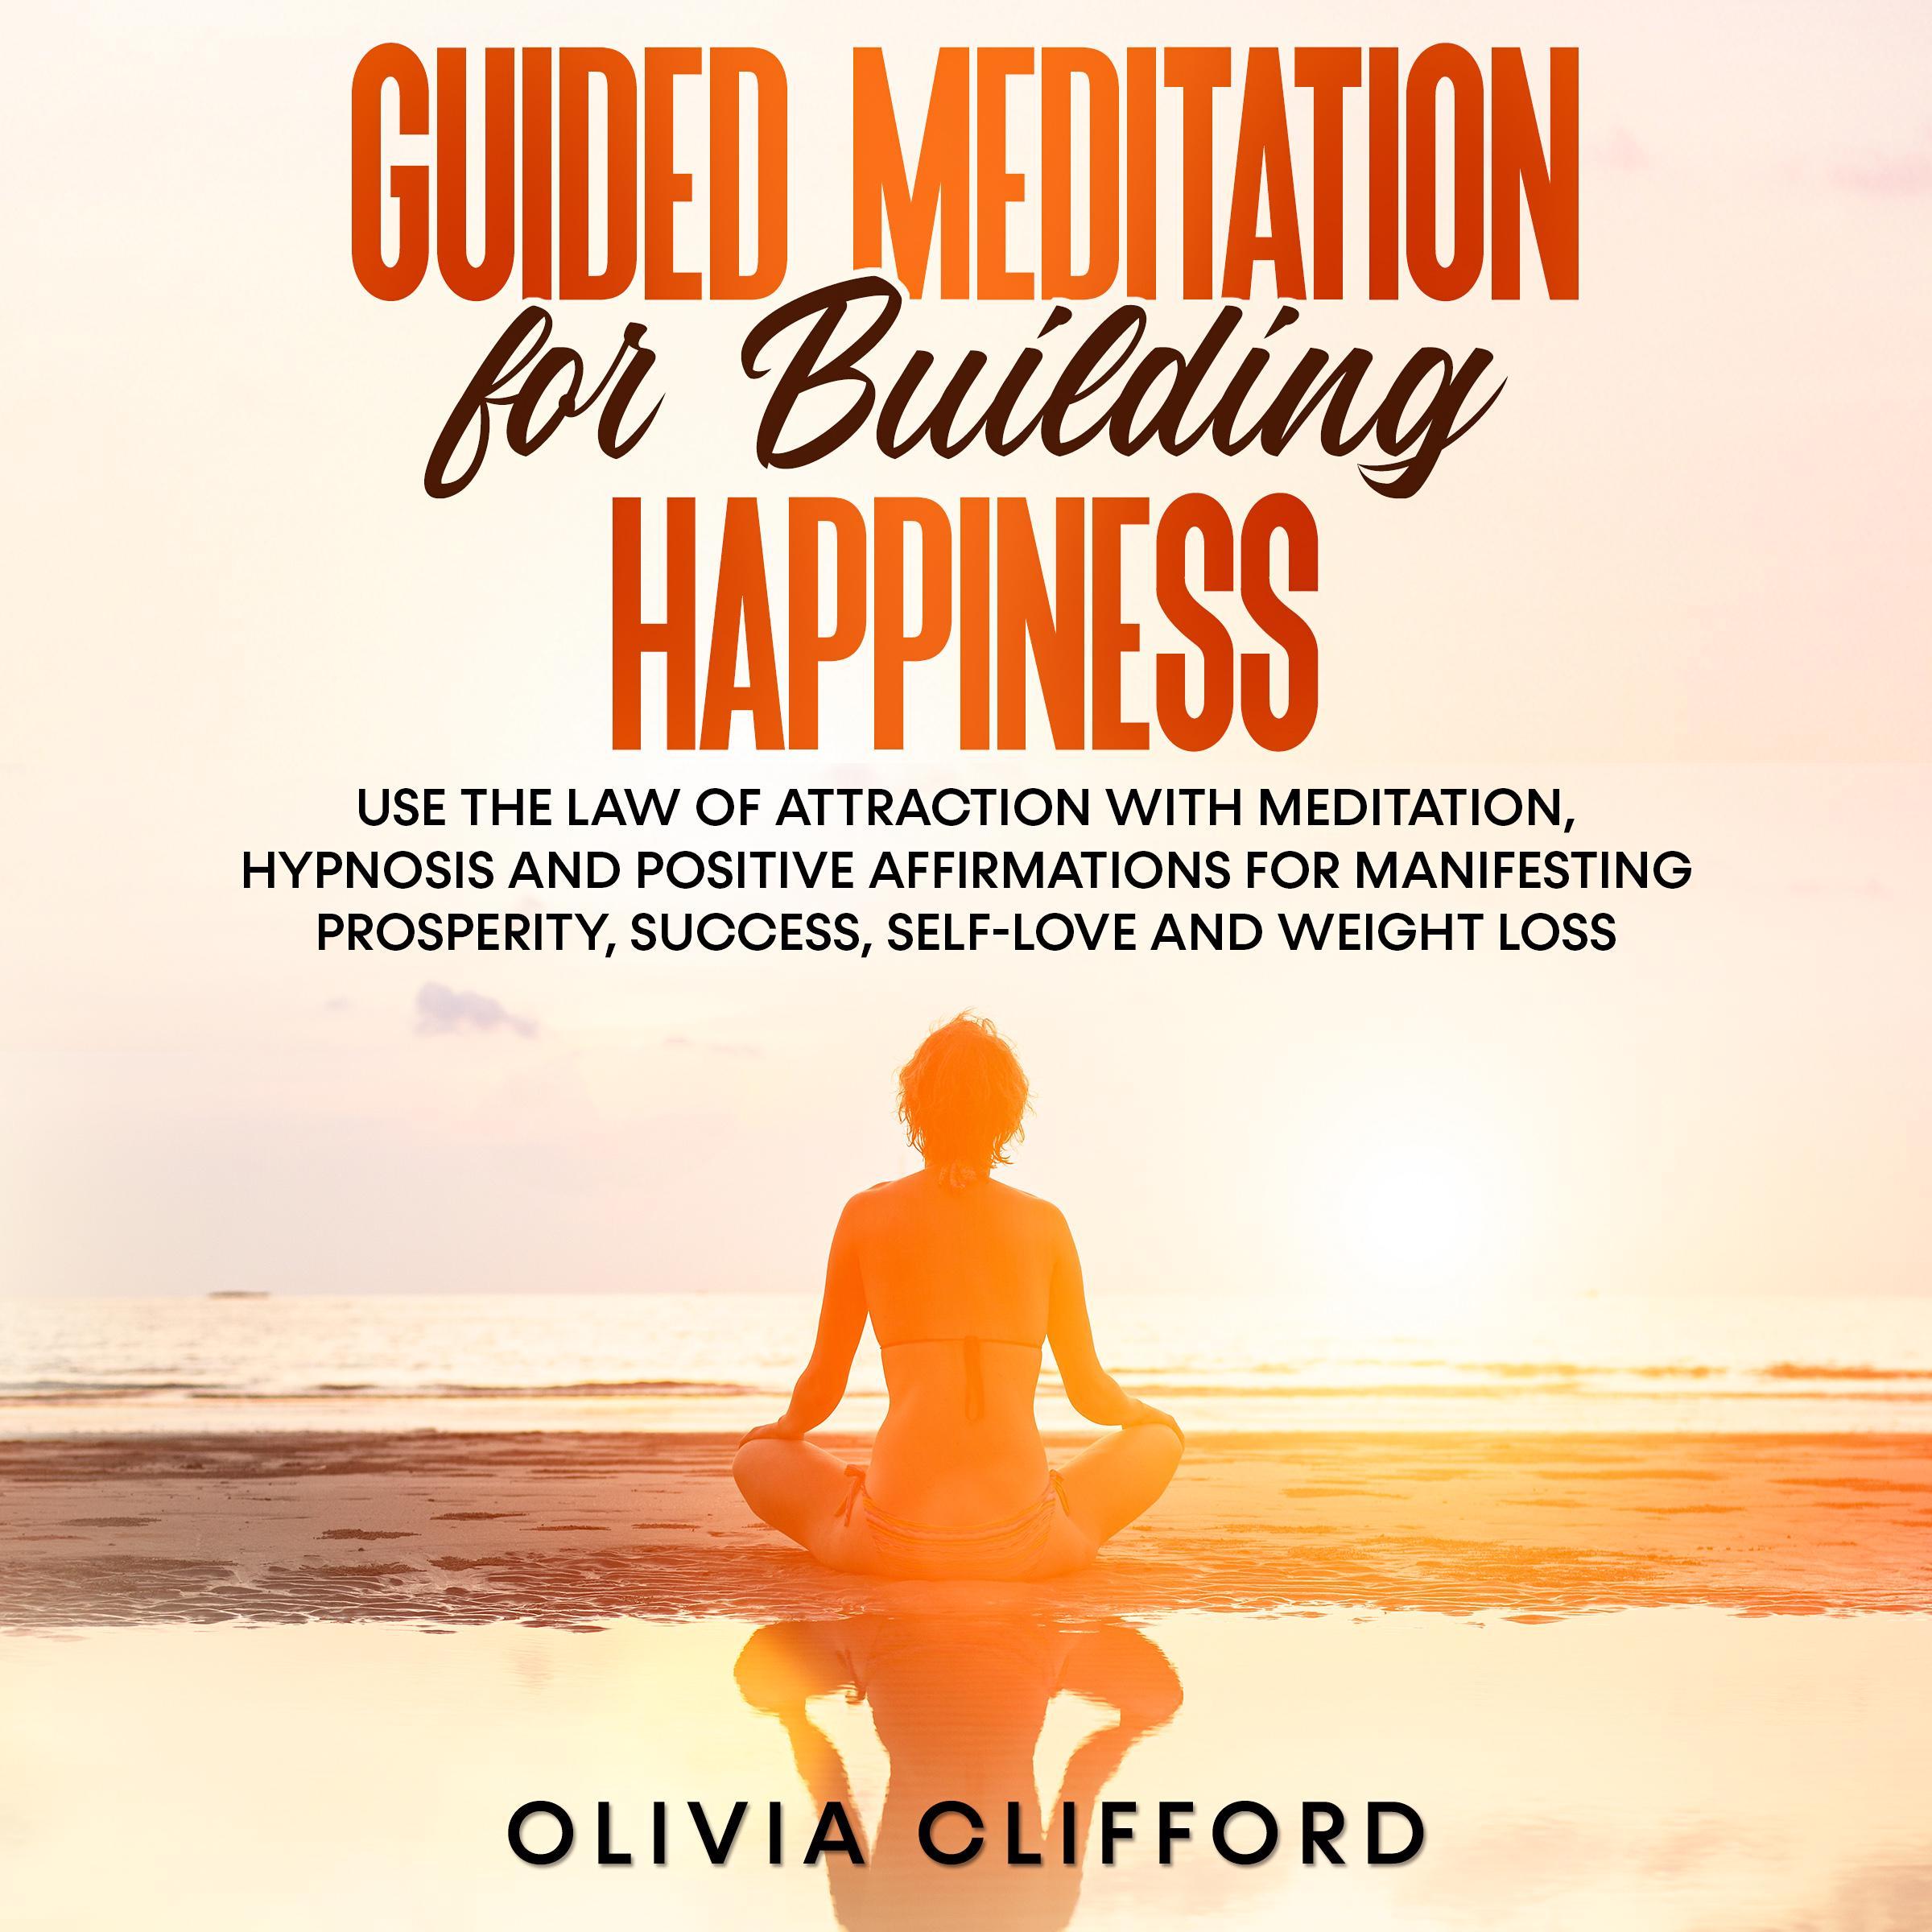 Guided Meditation for Building Happiness:   Use The Law of Attraction with Meditation, Hypnosis and Positive Affirmations for Manifesting Prosperity, Success, Self-Love and Weight Loss